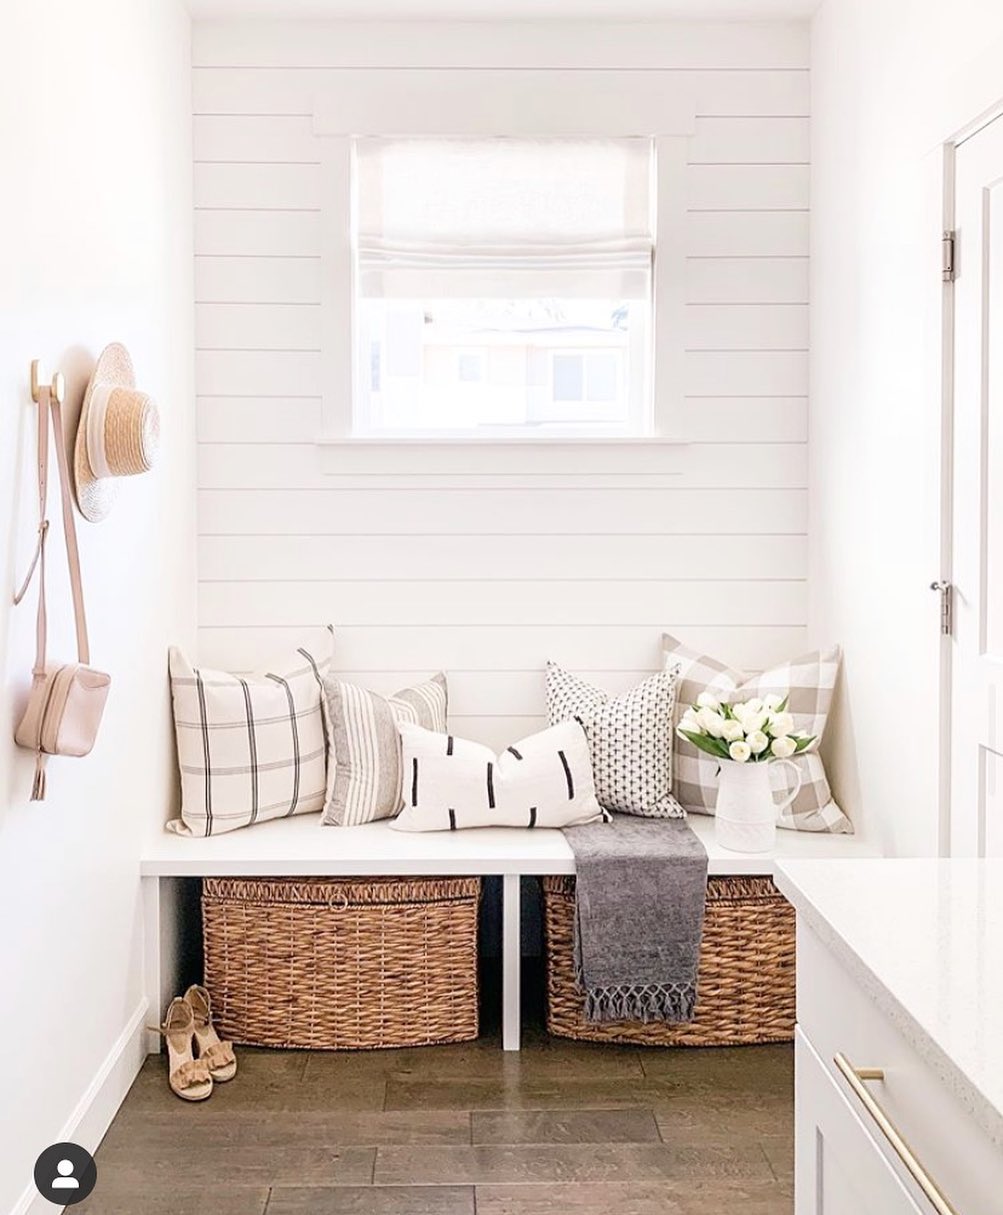 Entryway Nook Bench: How to Style Your Mini Entryway Bench for a Warm Welcome